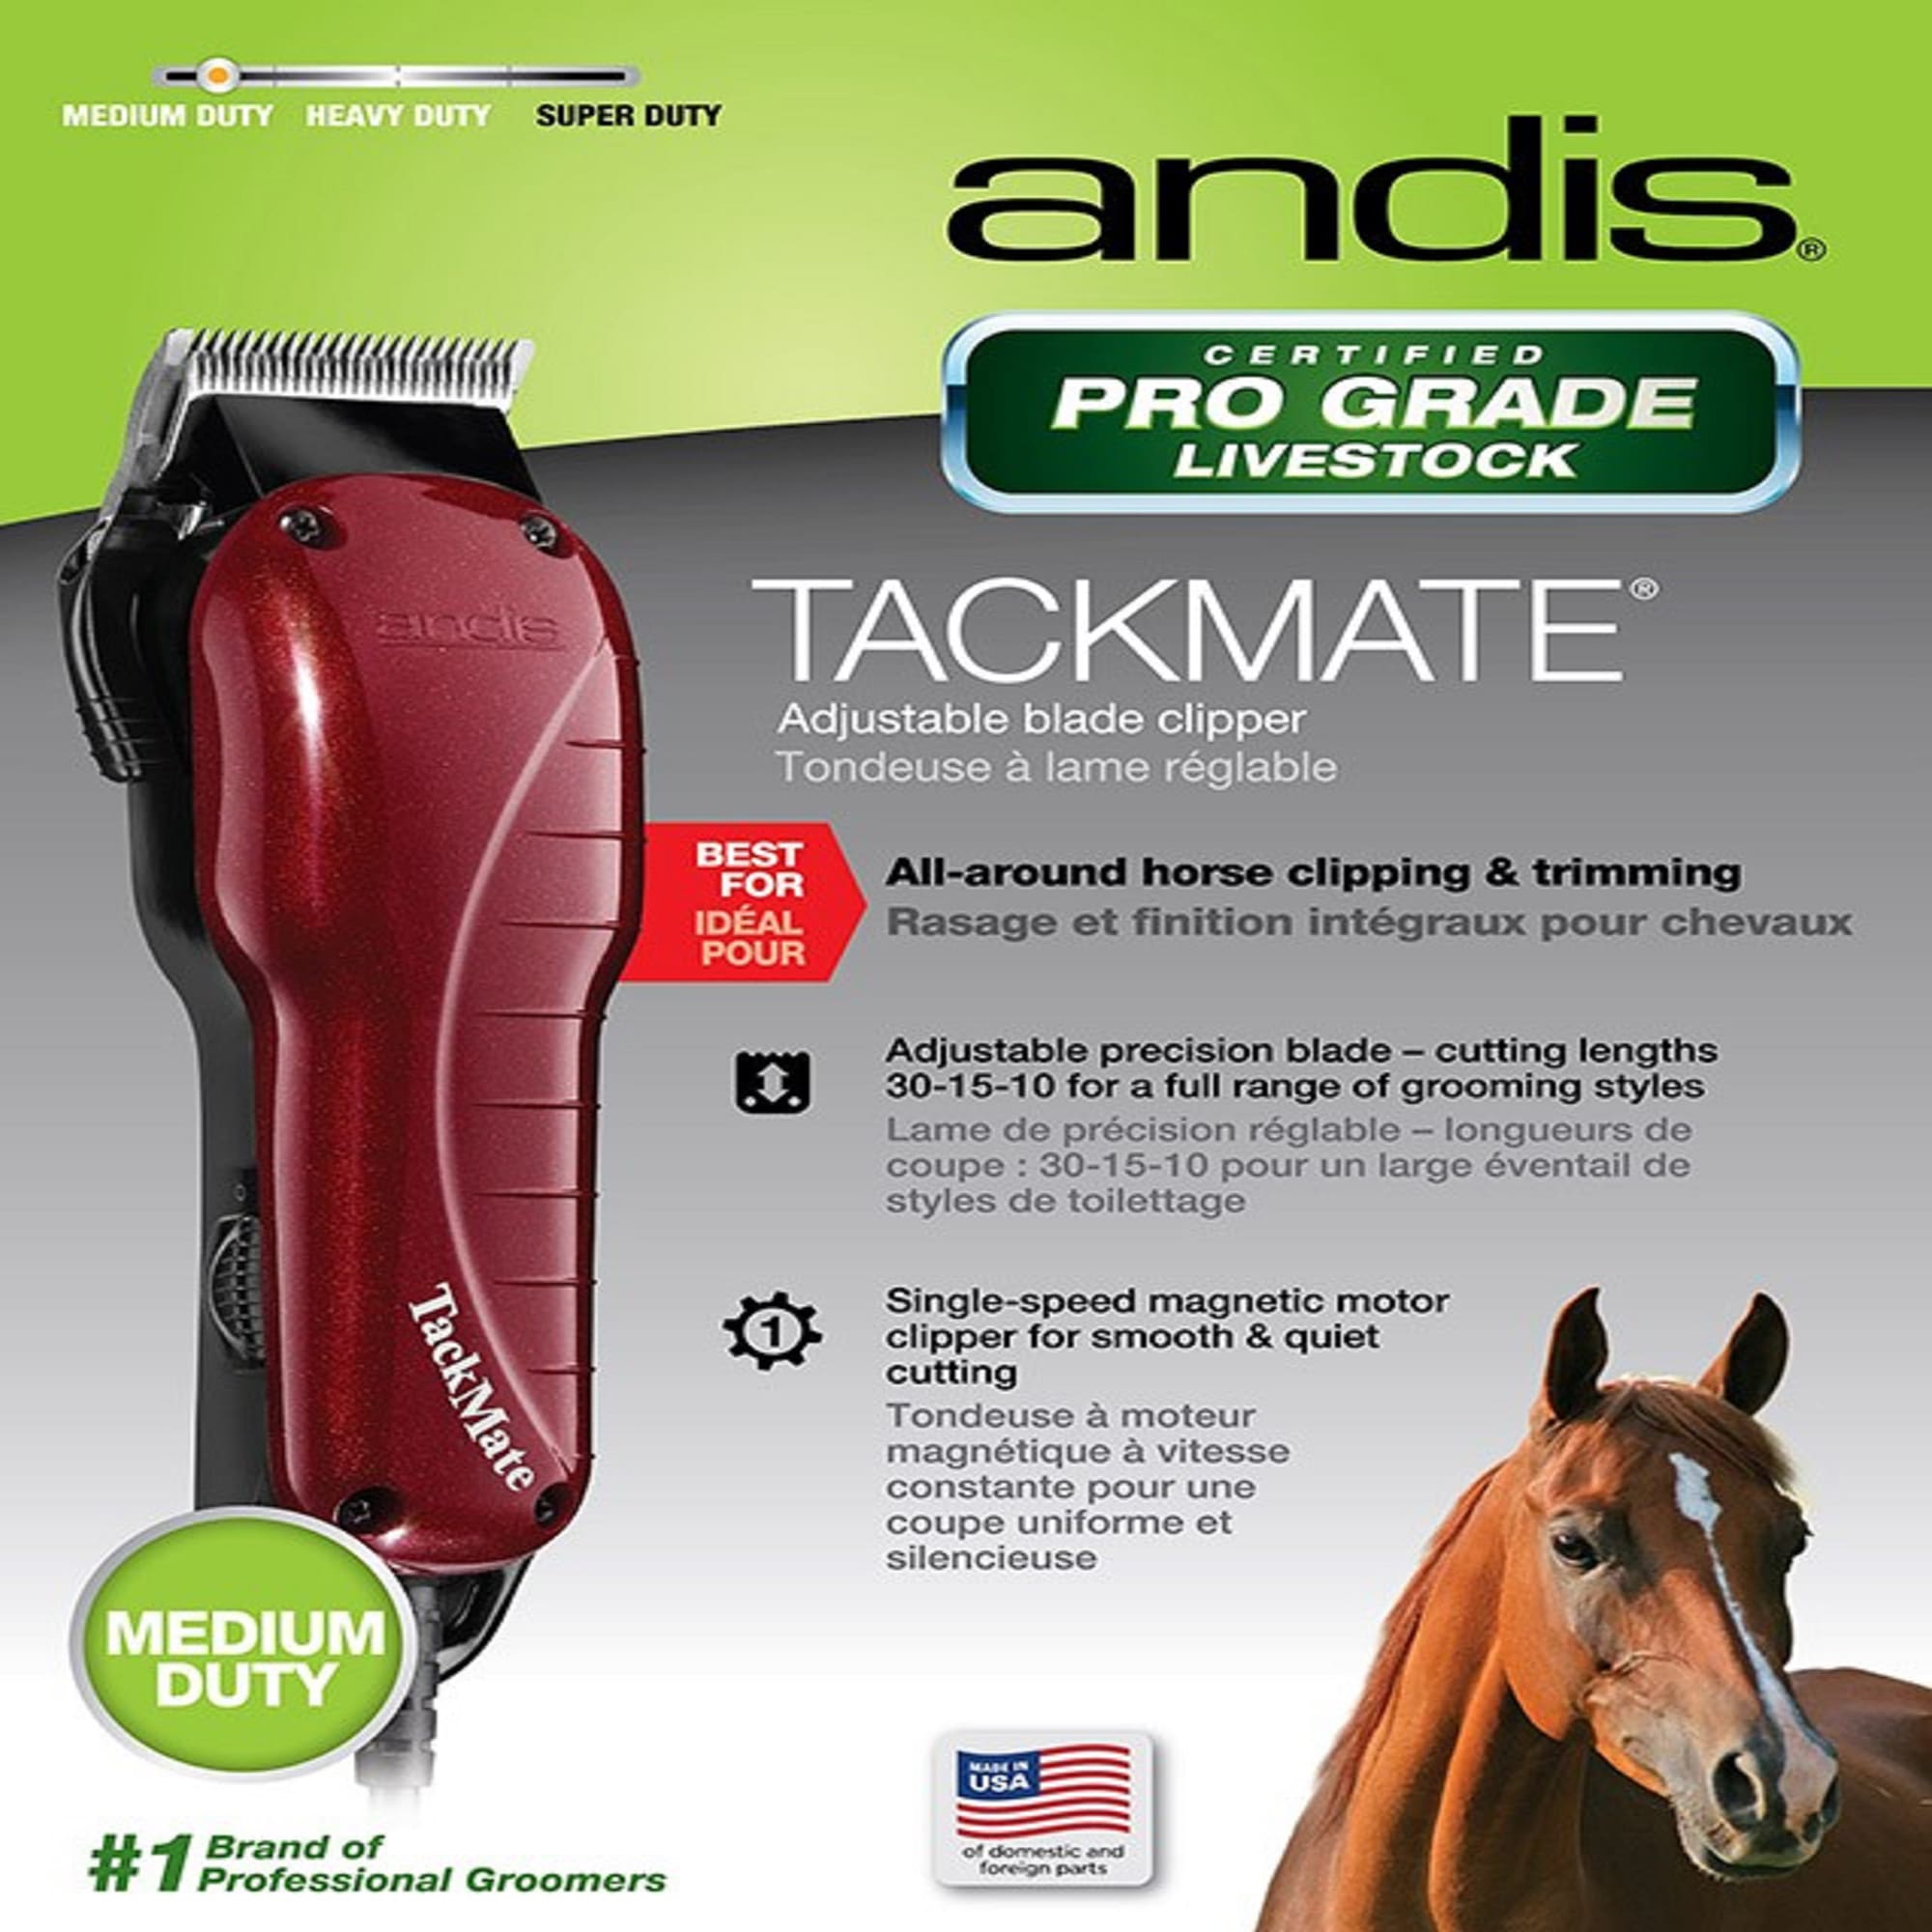 Andis Tackmate Adjustable Blade High Speed EQUINE CLIPPER SET*HORSE,Livestock 